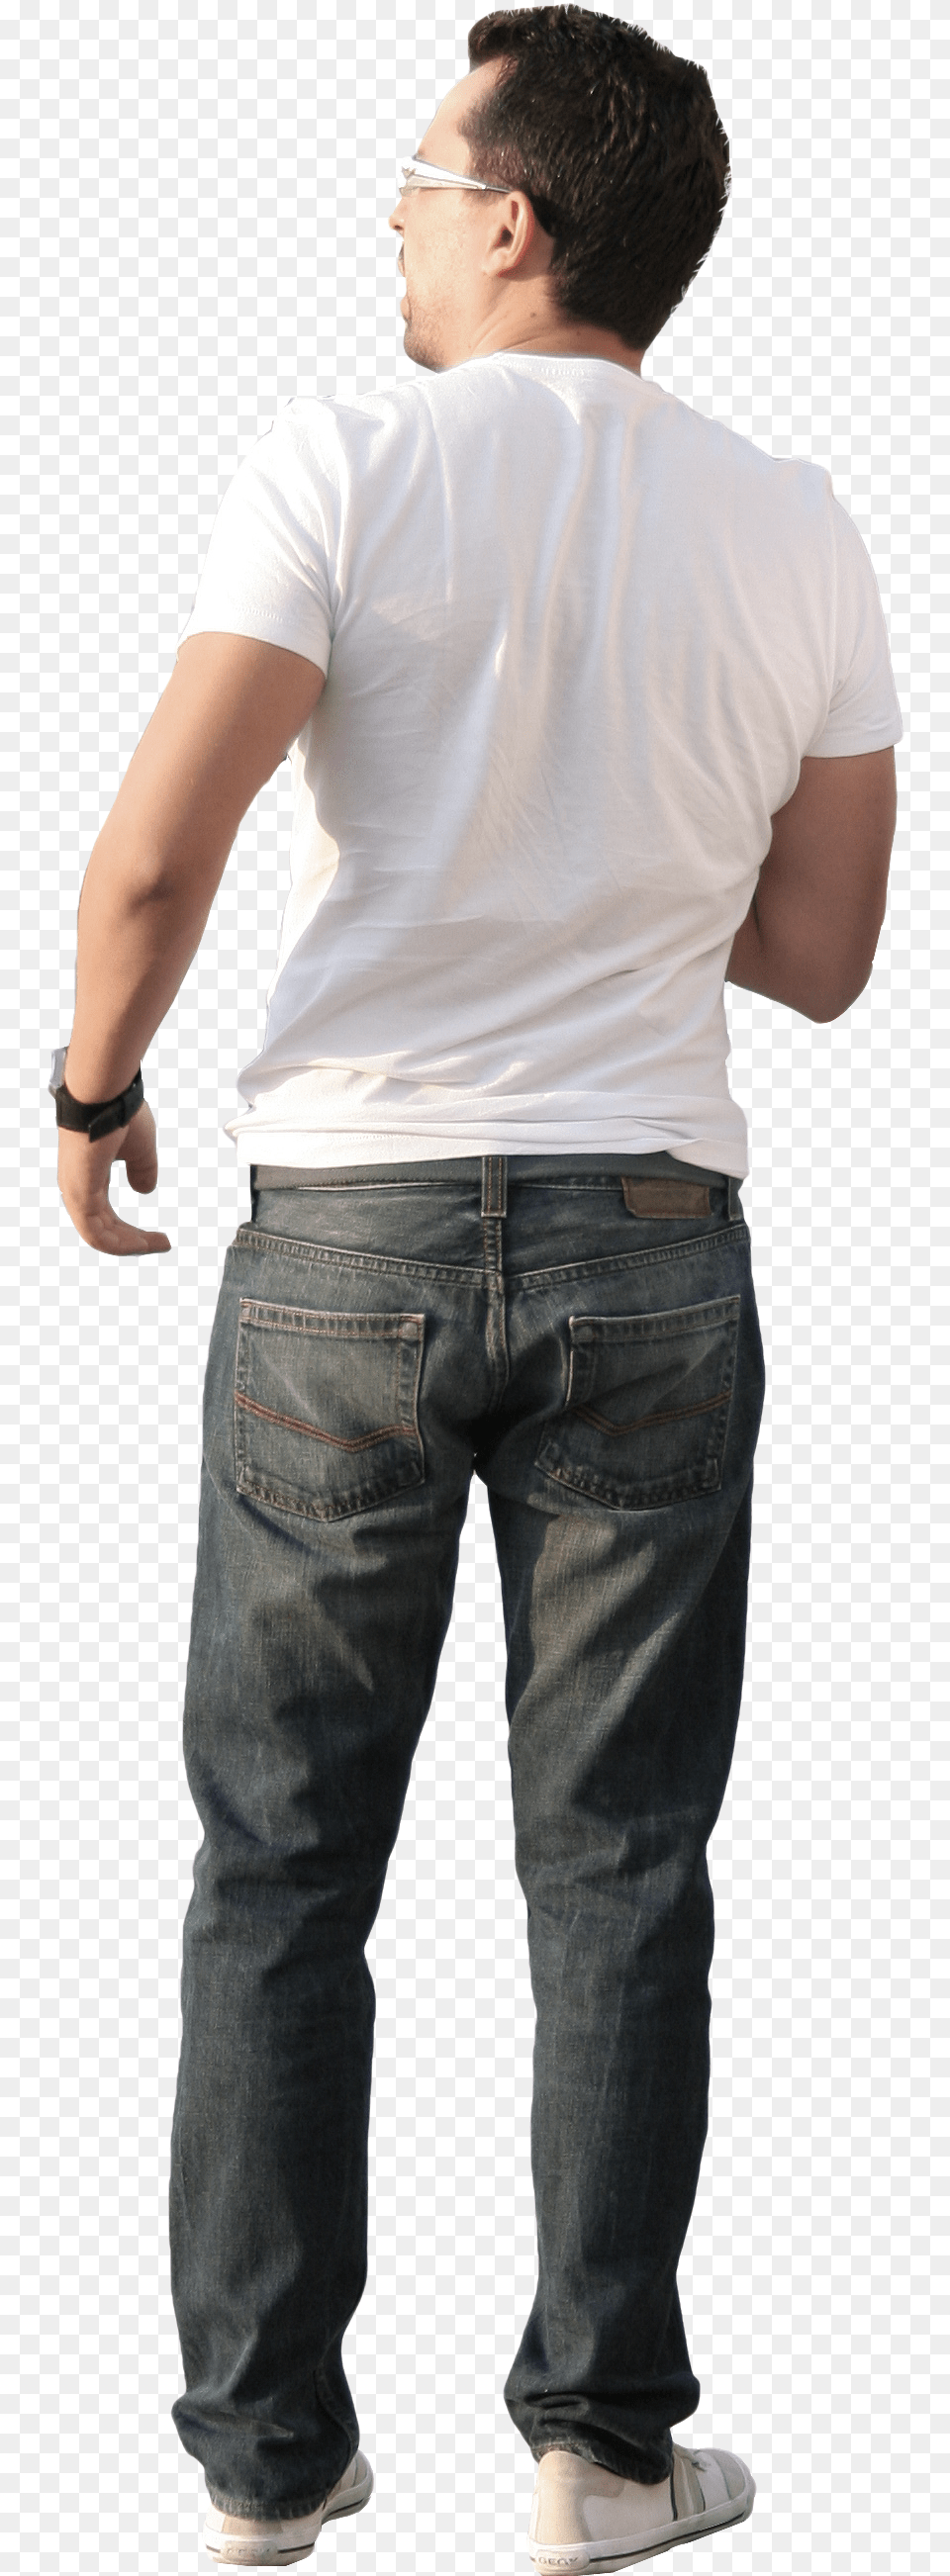 Man In White T Shirt Free Cut Out People Trees And Leaves 2d People, Jeans, Pants, T-shirt, Undershirt Png